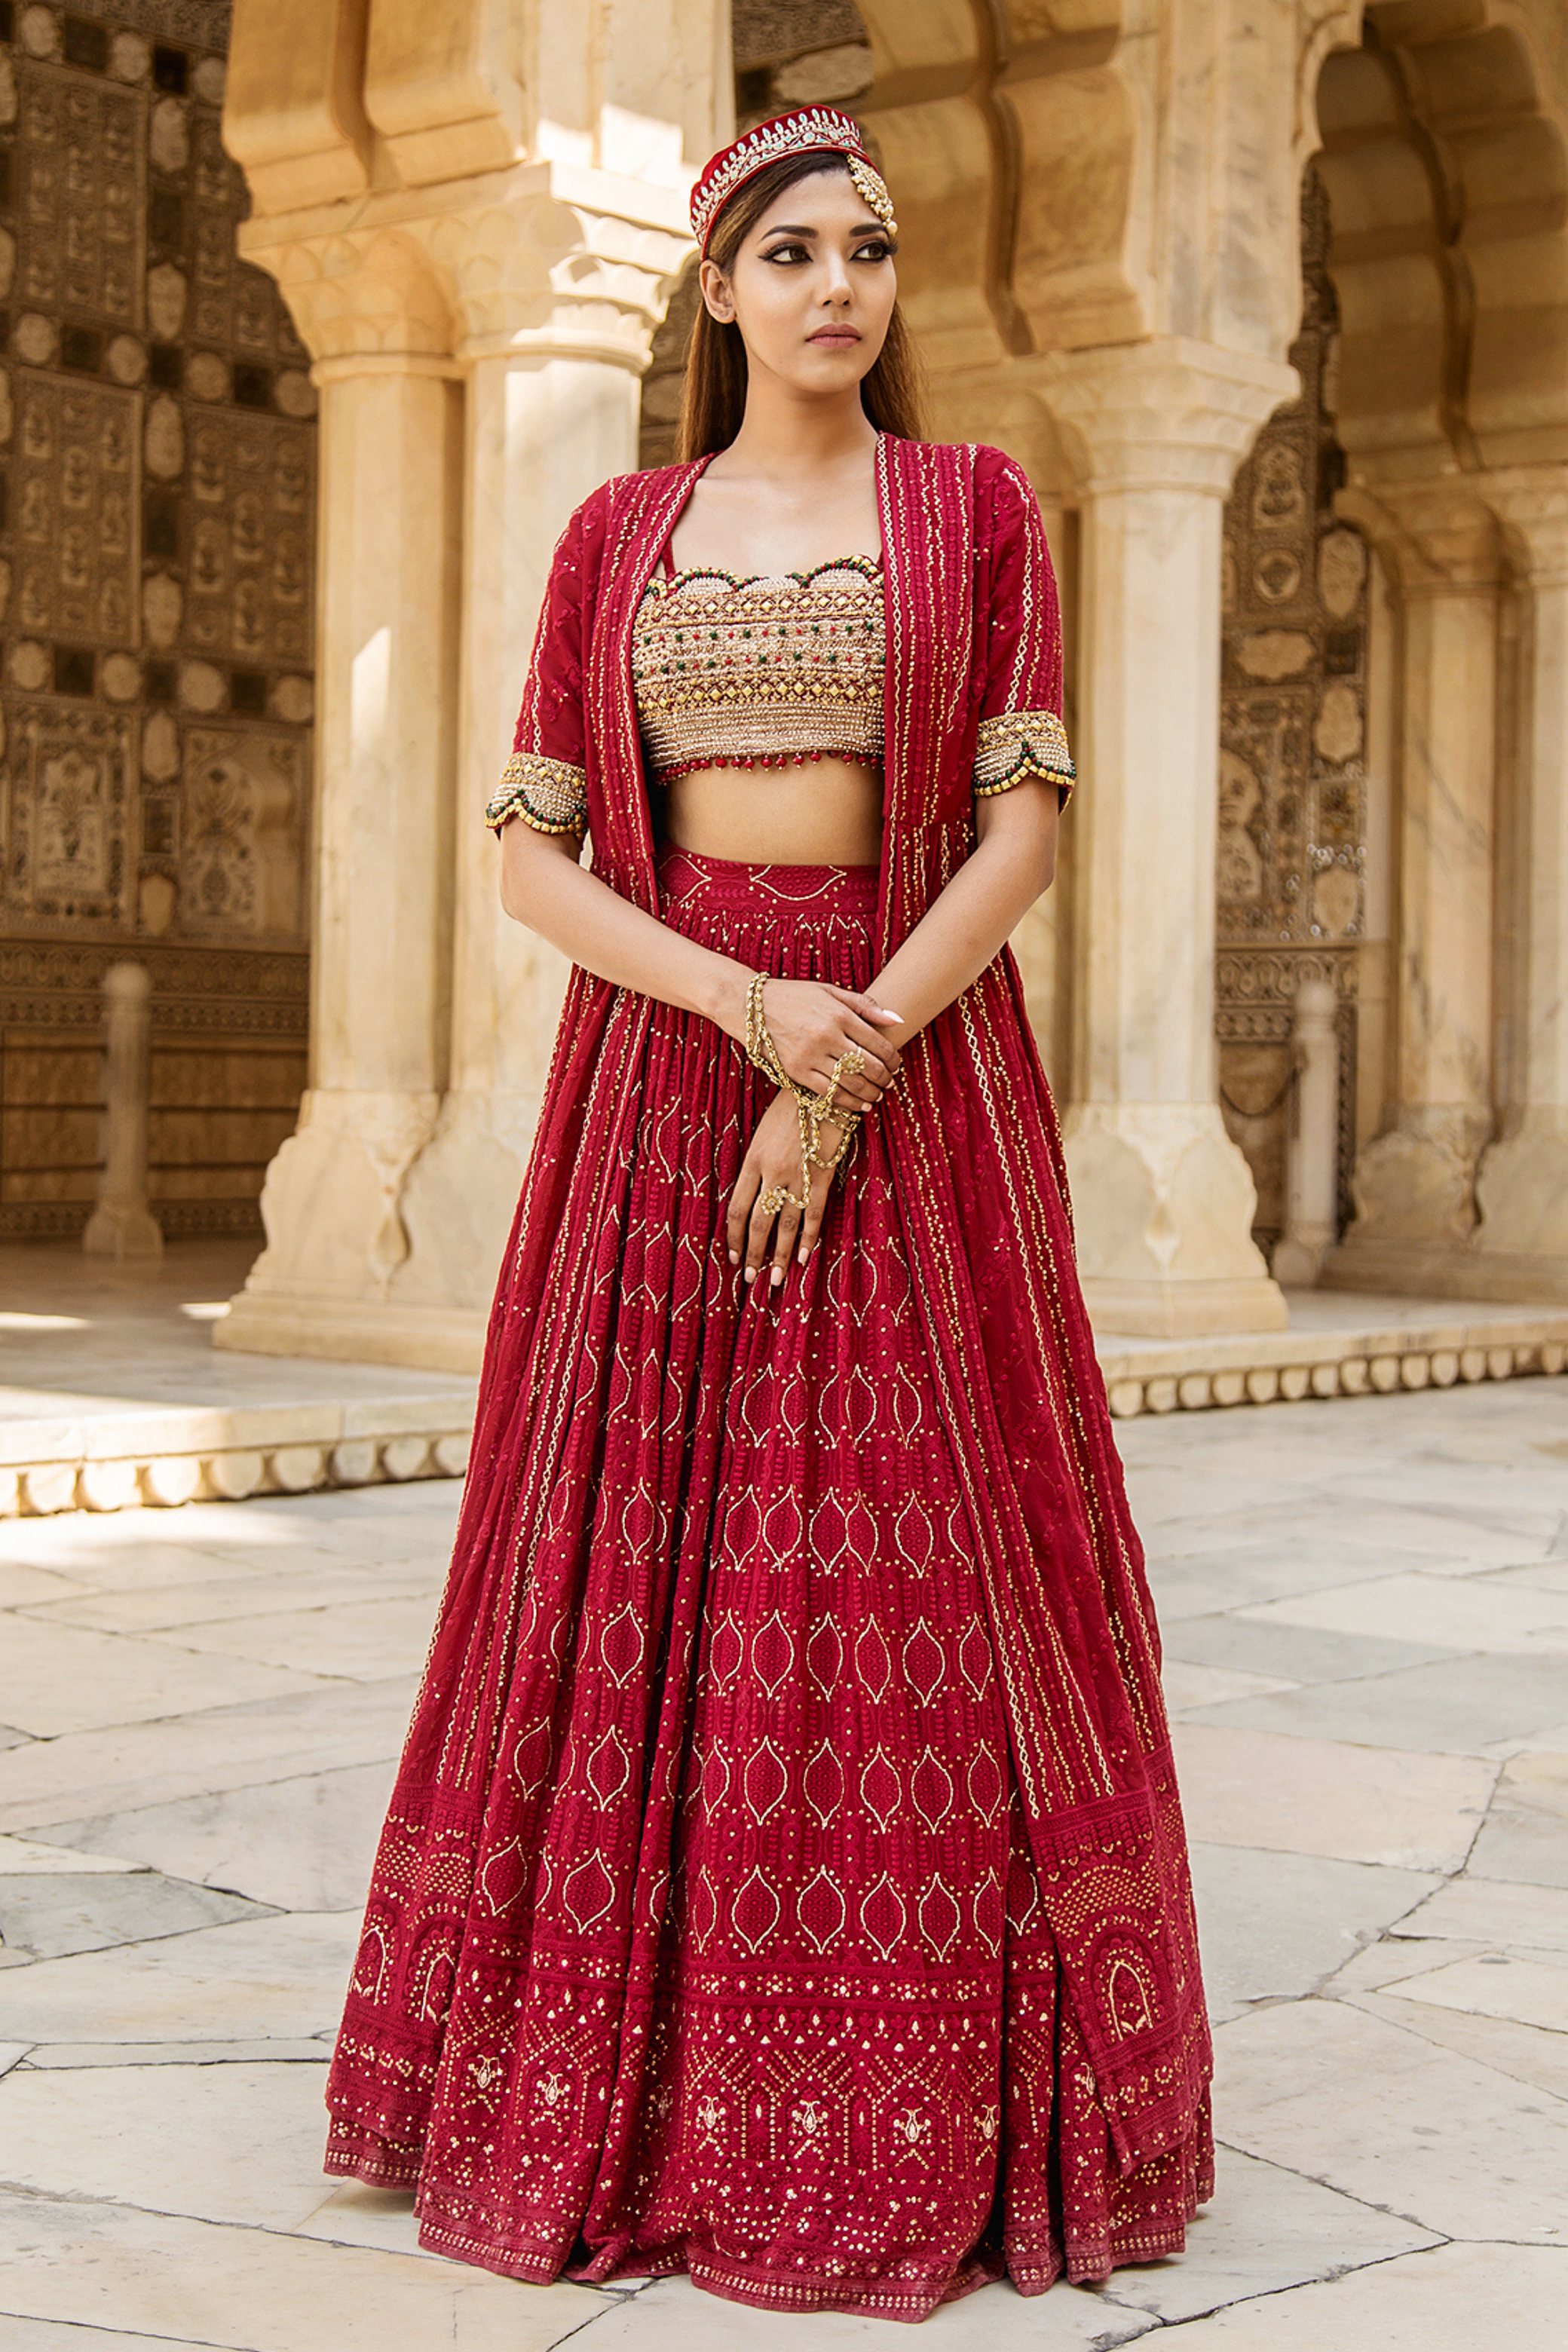 Red Chikankari Lehenga with Embroidered Blouse and Cape